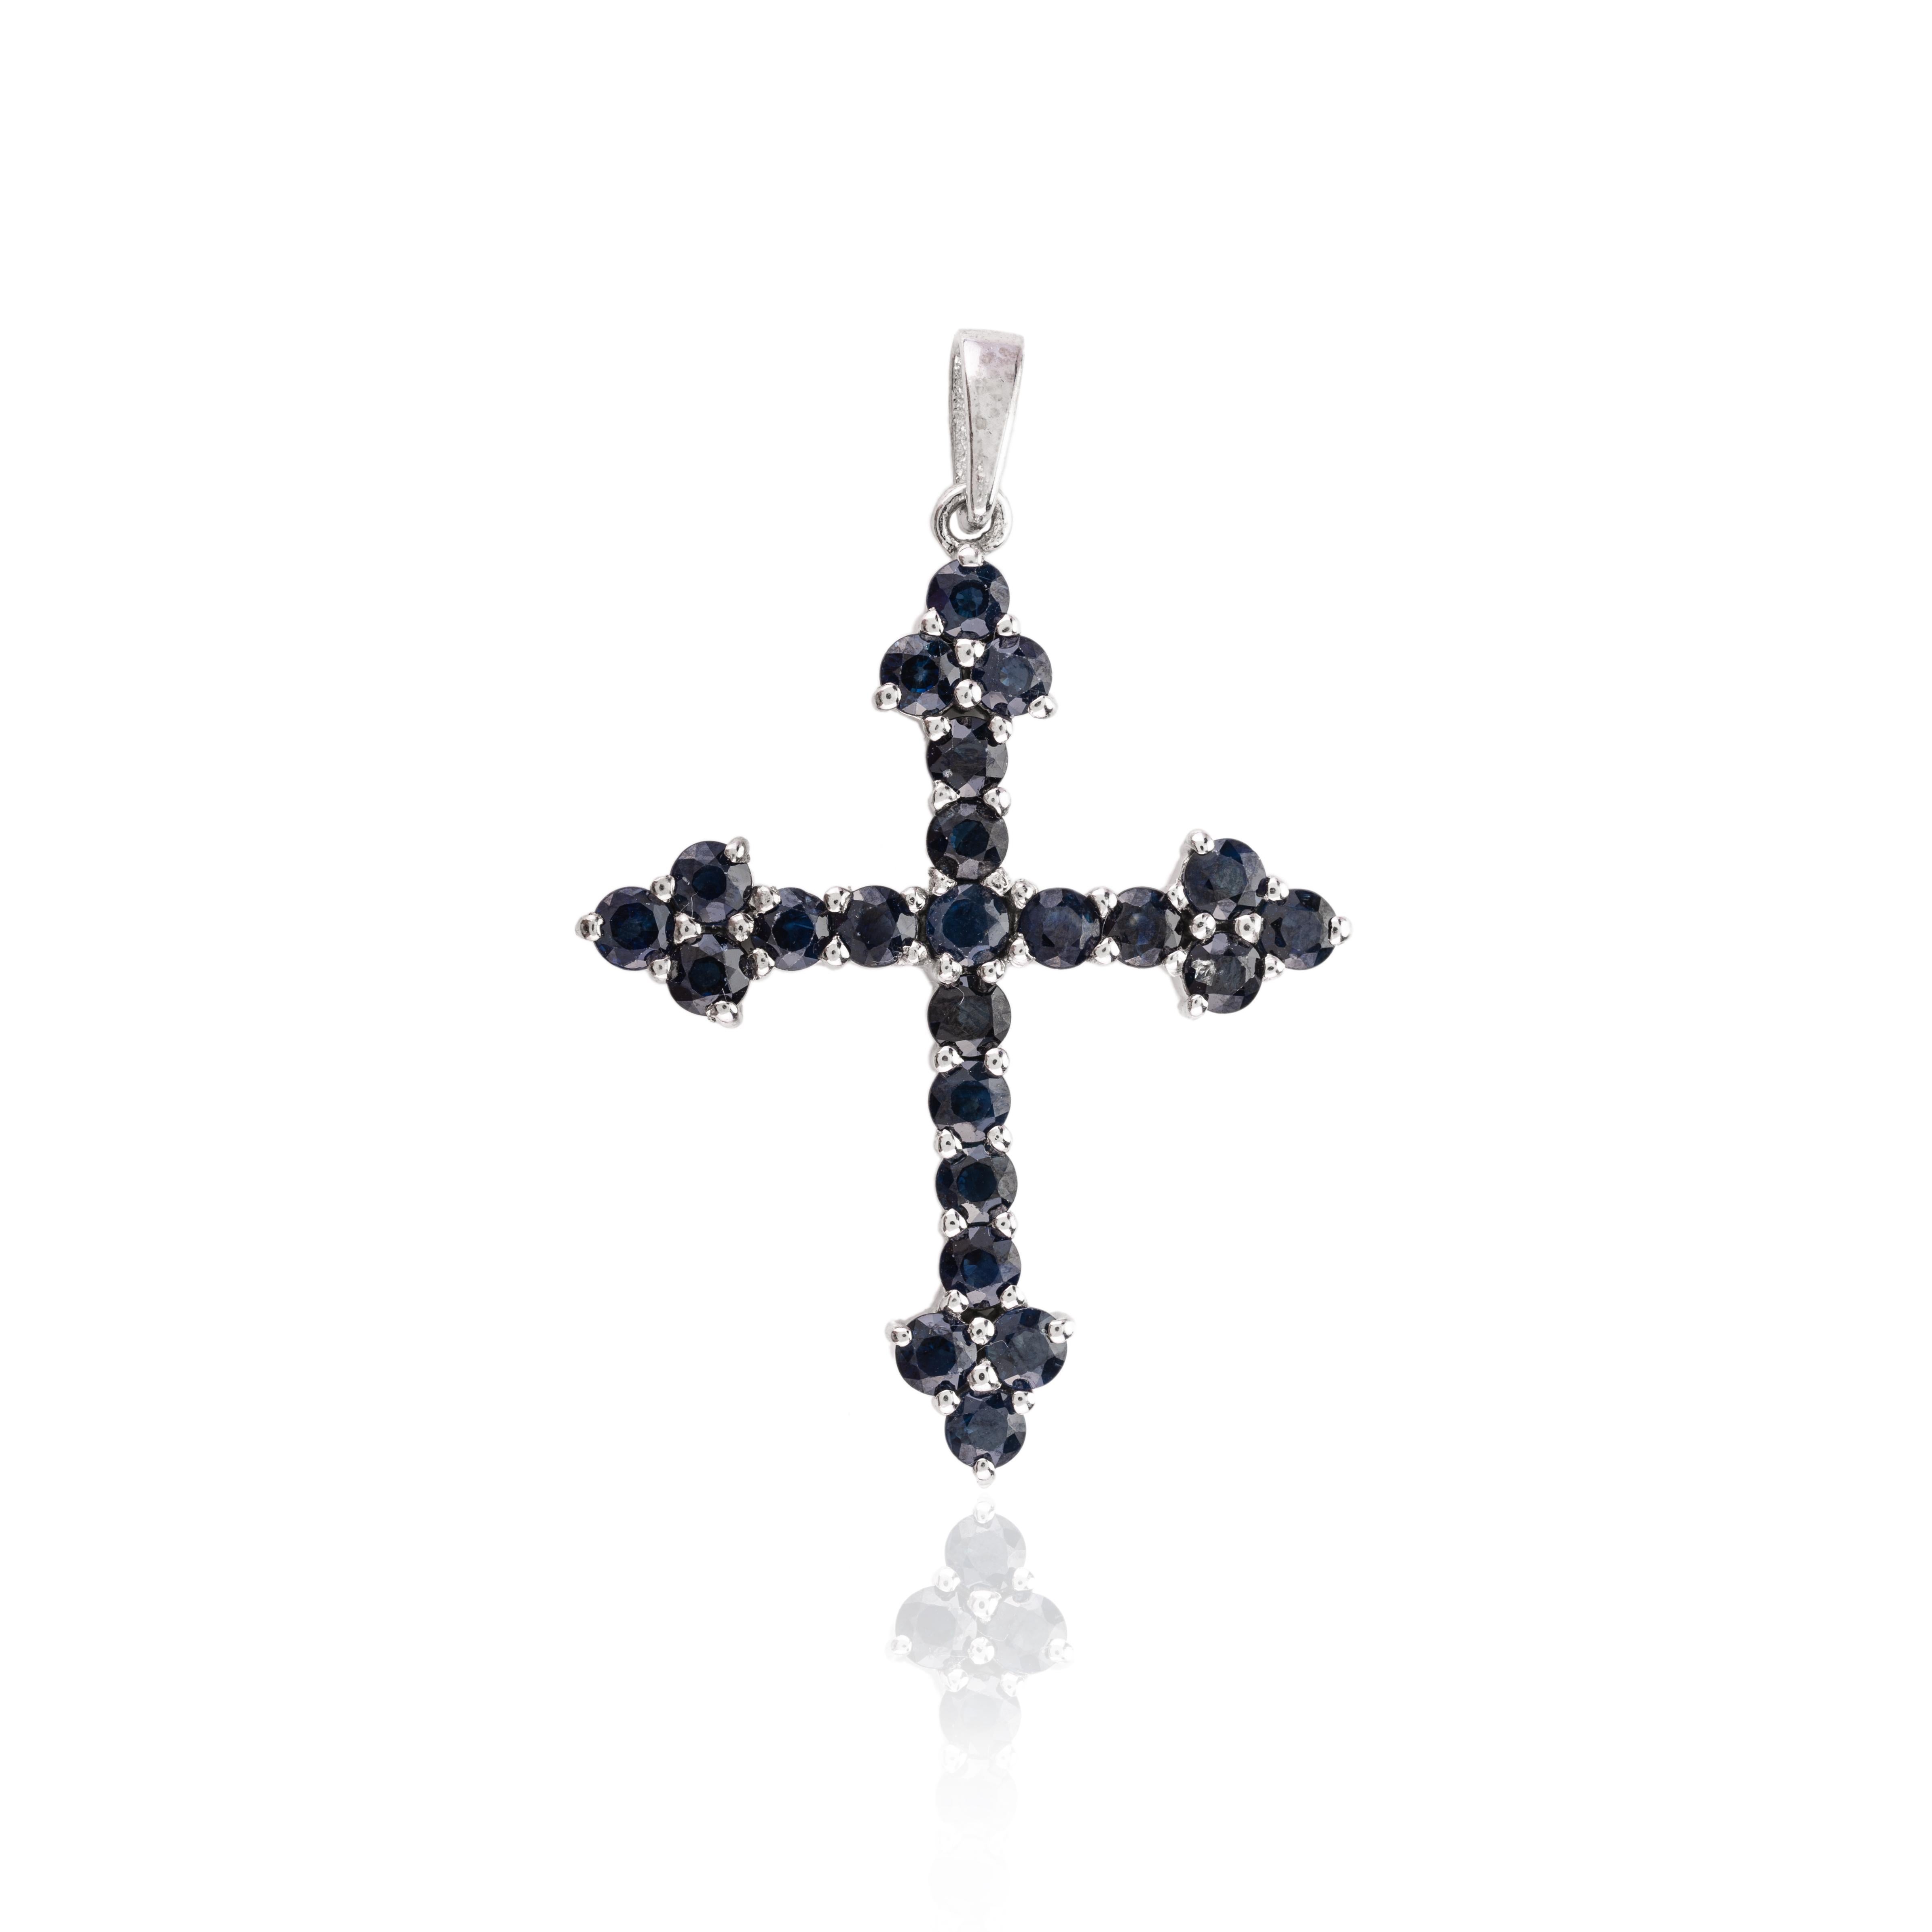 This Natural 5.58 CTW Blue Sapphire Cross Pendant Gifts is meticulously crafted from the finest materials and adorned with stunning sapphire which helps in relieving stress, anxiety and depression.
This delicate to statement pendants, suits every